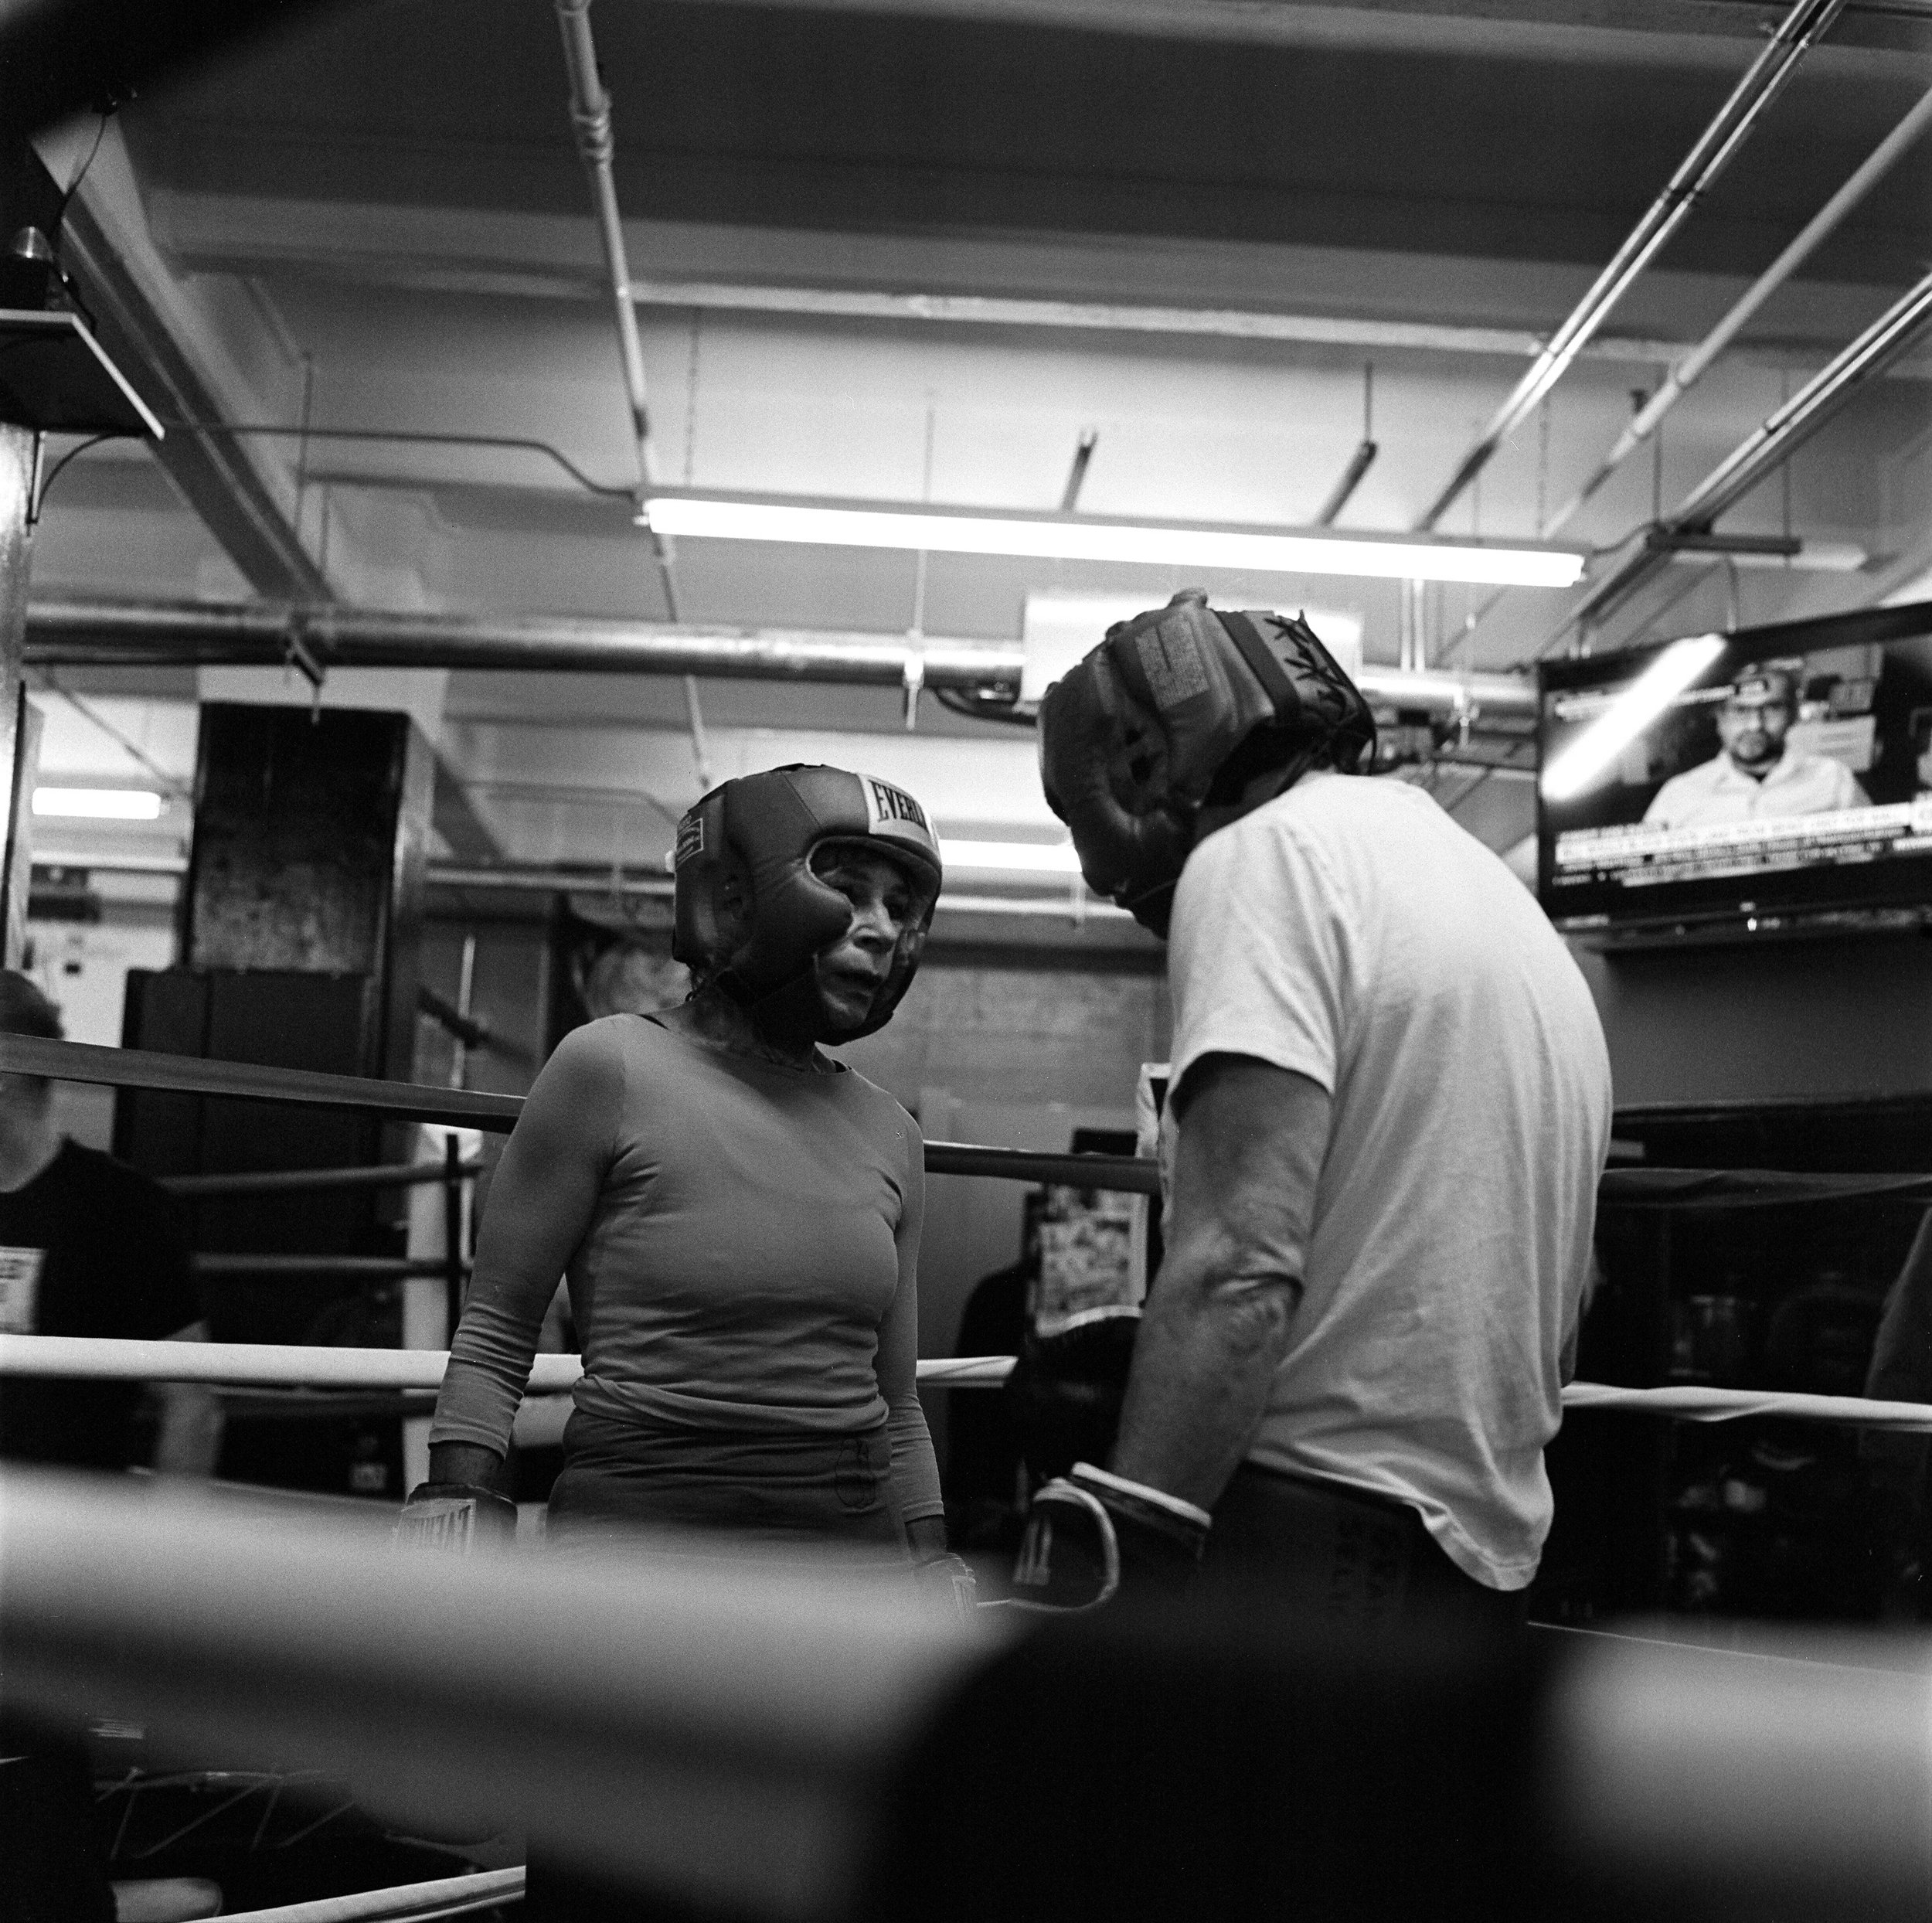  A project that began in 2015 depicting the boxers of Gleason’s Gym in DUMBO, Brooklyn.   